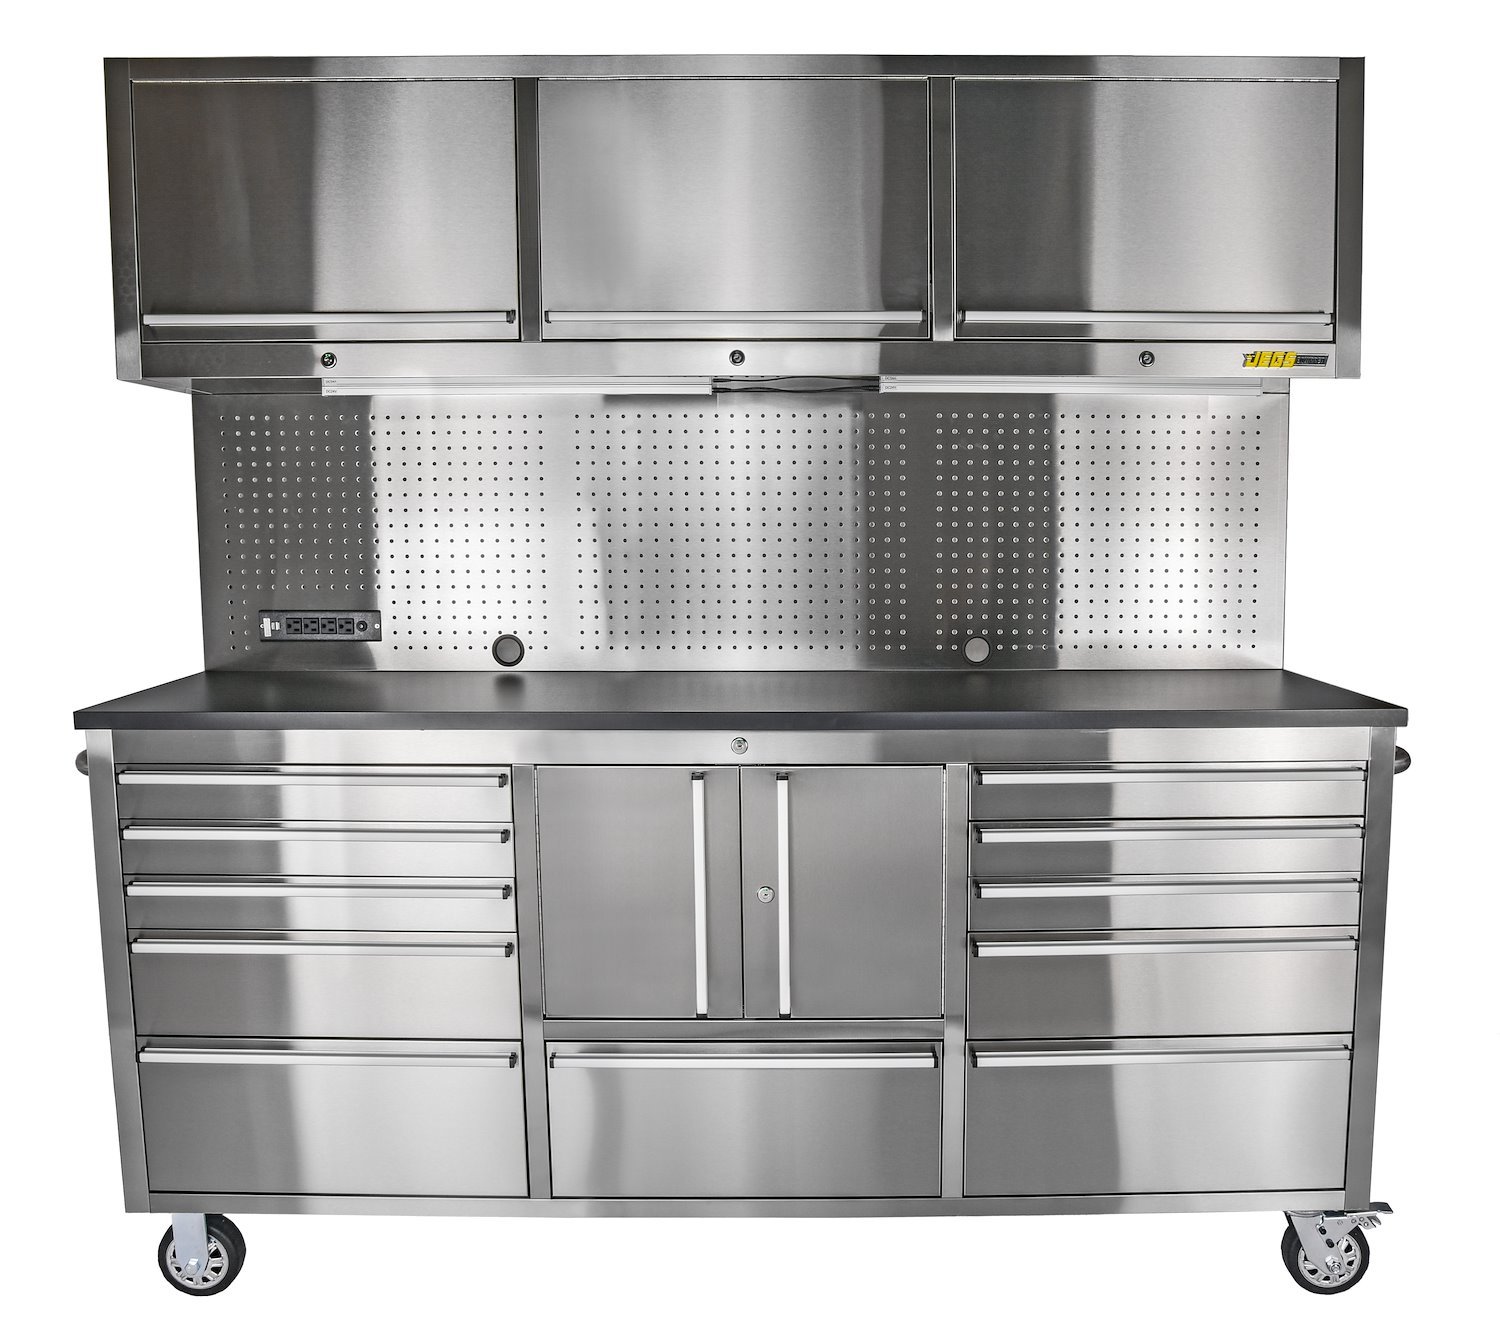 Stainless Steel Tool Box | Buy Stainless Steel Tool Boxes Including this  11-Drawer, 72 Inch Tool Box & Cabinent Combination - JEGS